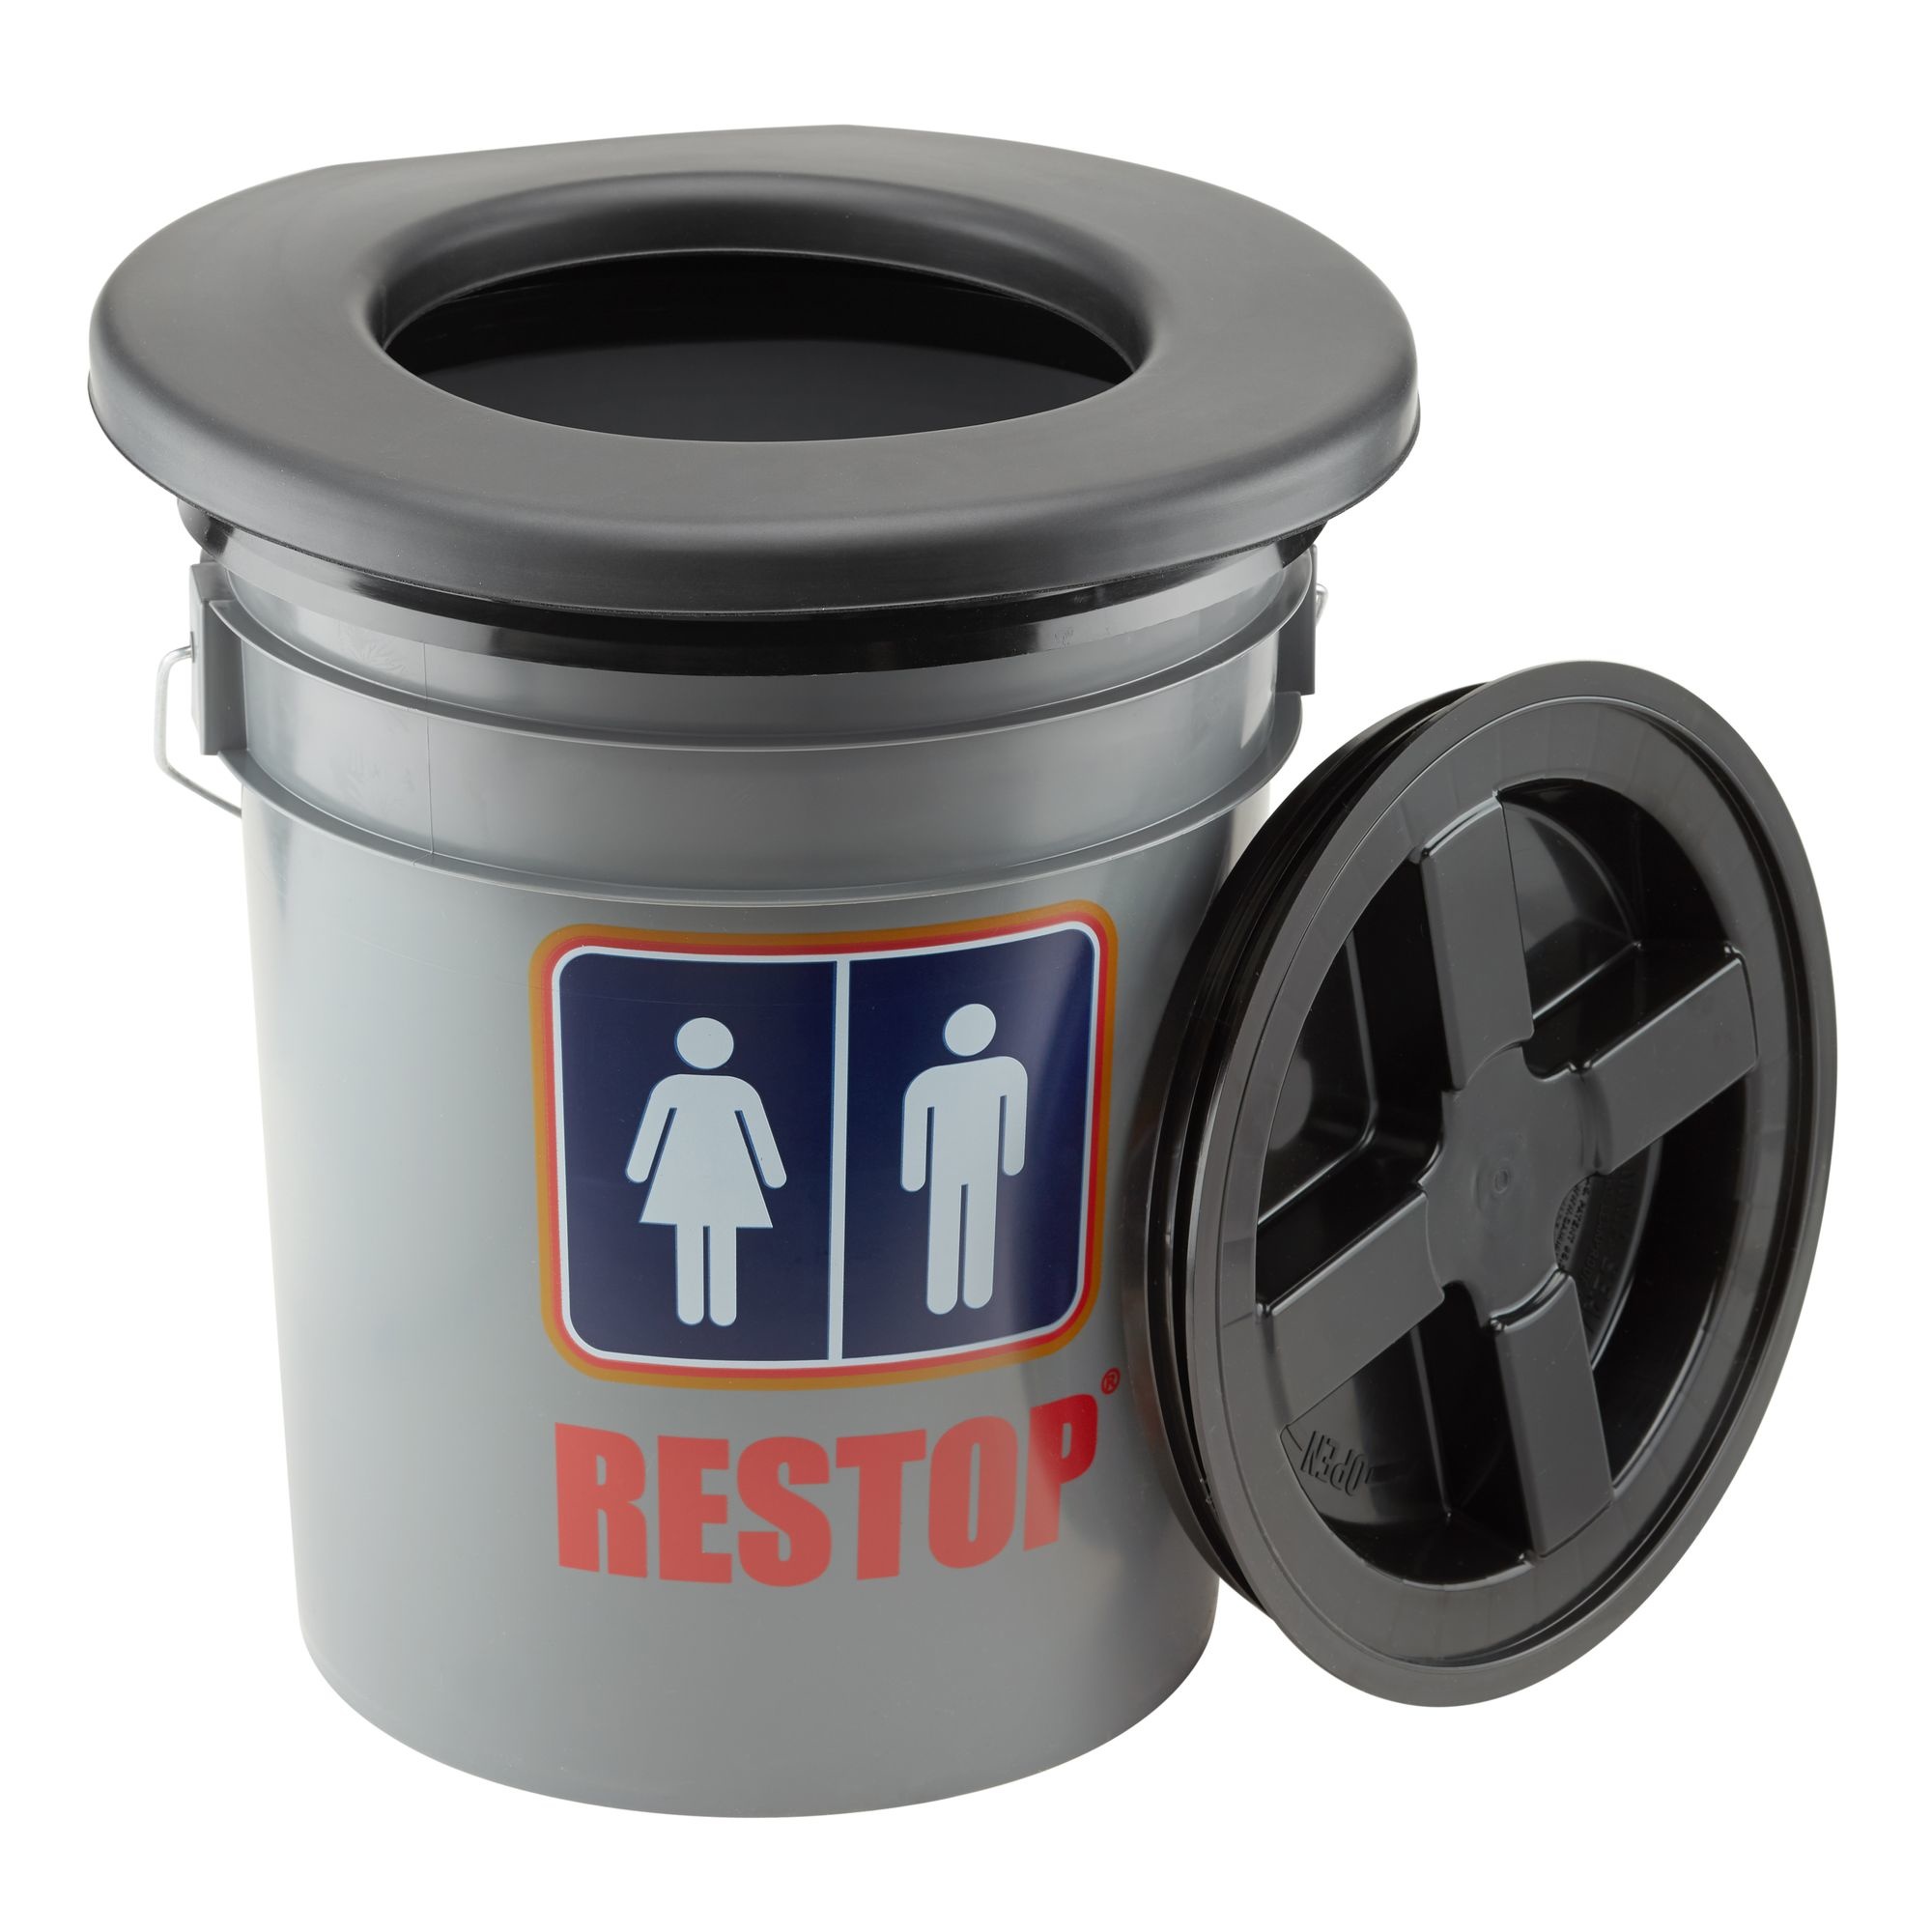 NRS Copy of Restop Commode Toilet With Bags